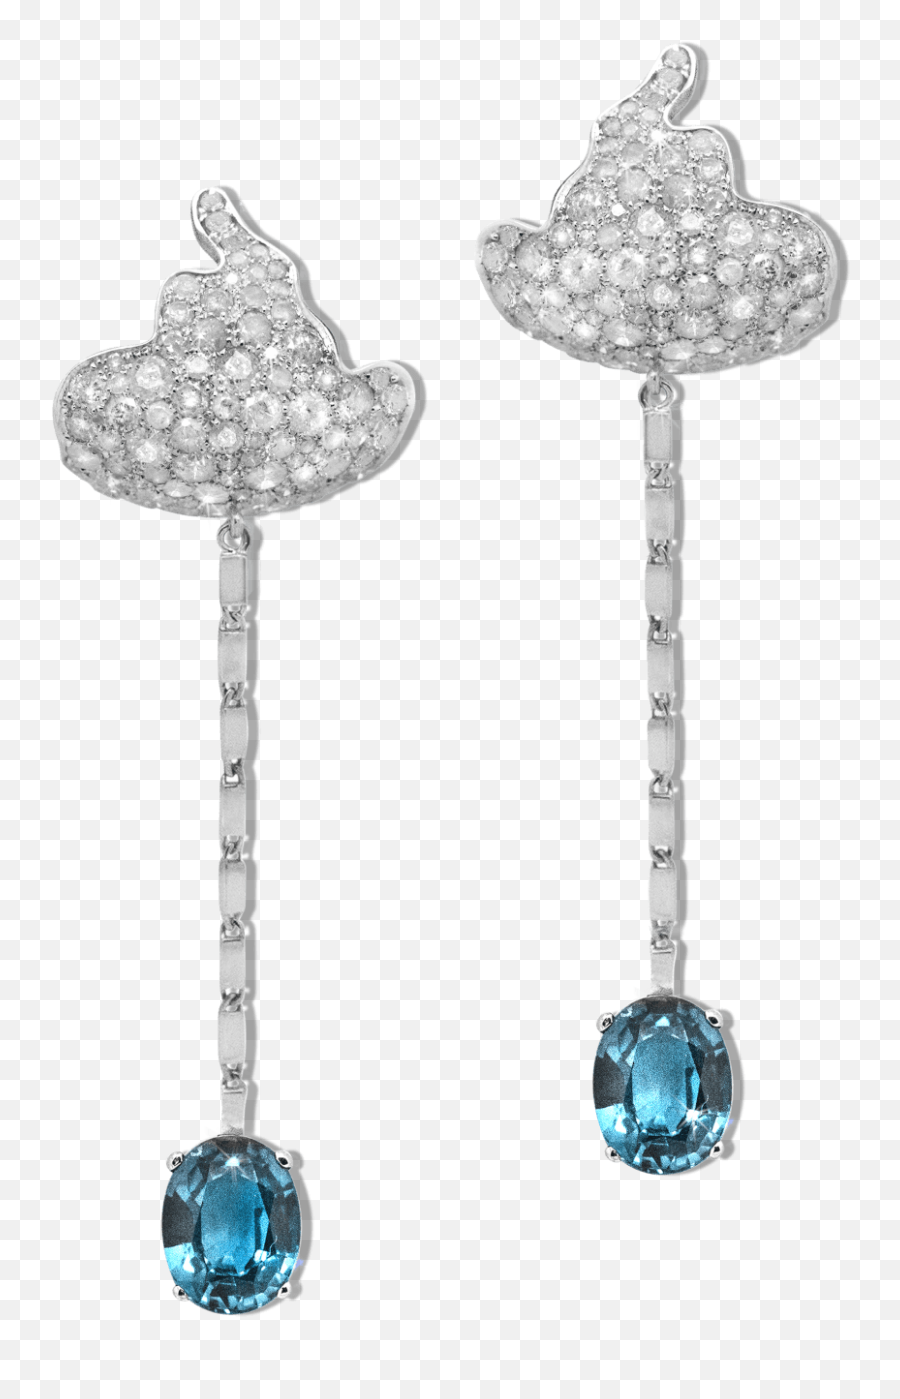 Miscible White Gold Earrings Set With 2 Blue Sapphires And Emoji,4 Diamonds Are Emotions